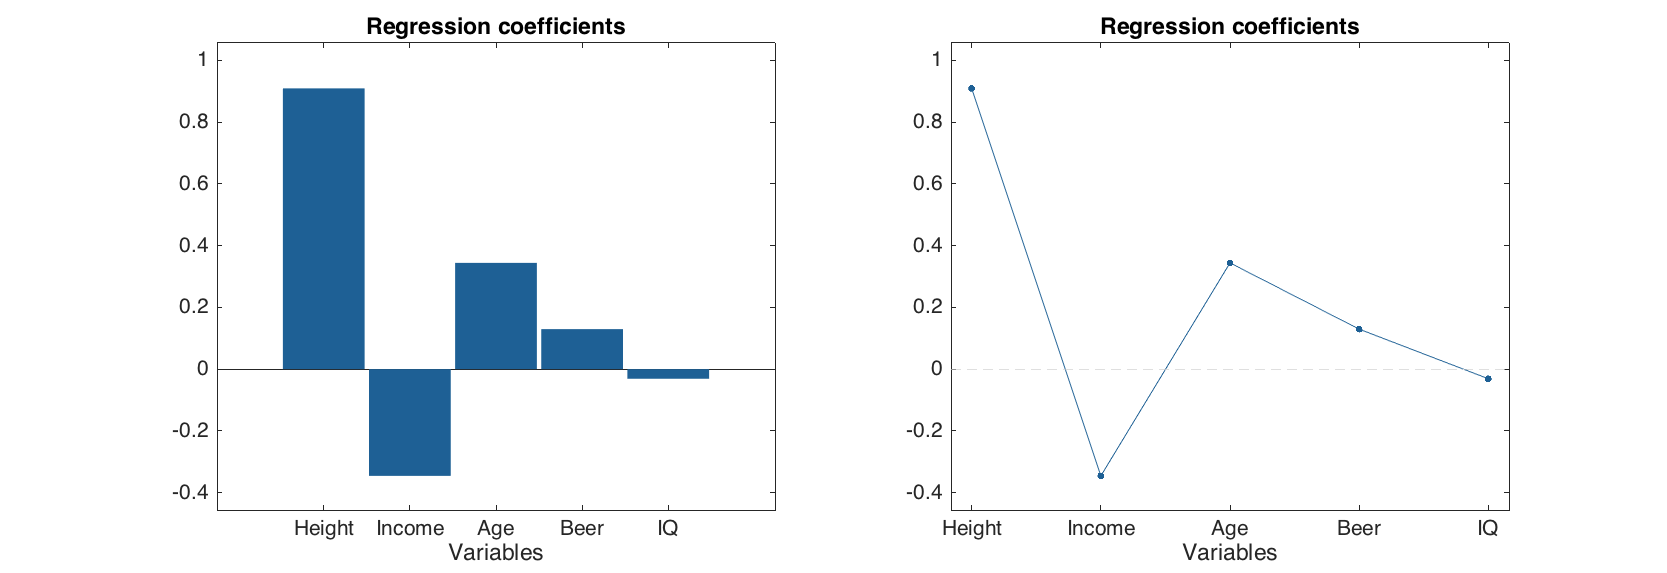 Regression coefficients plots without confidence intervals